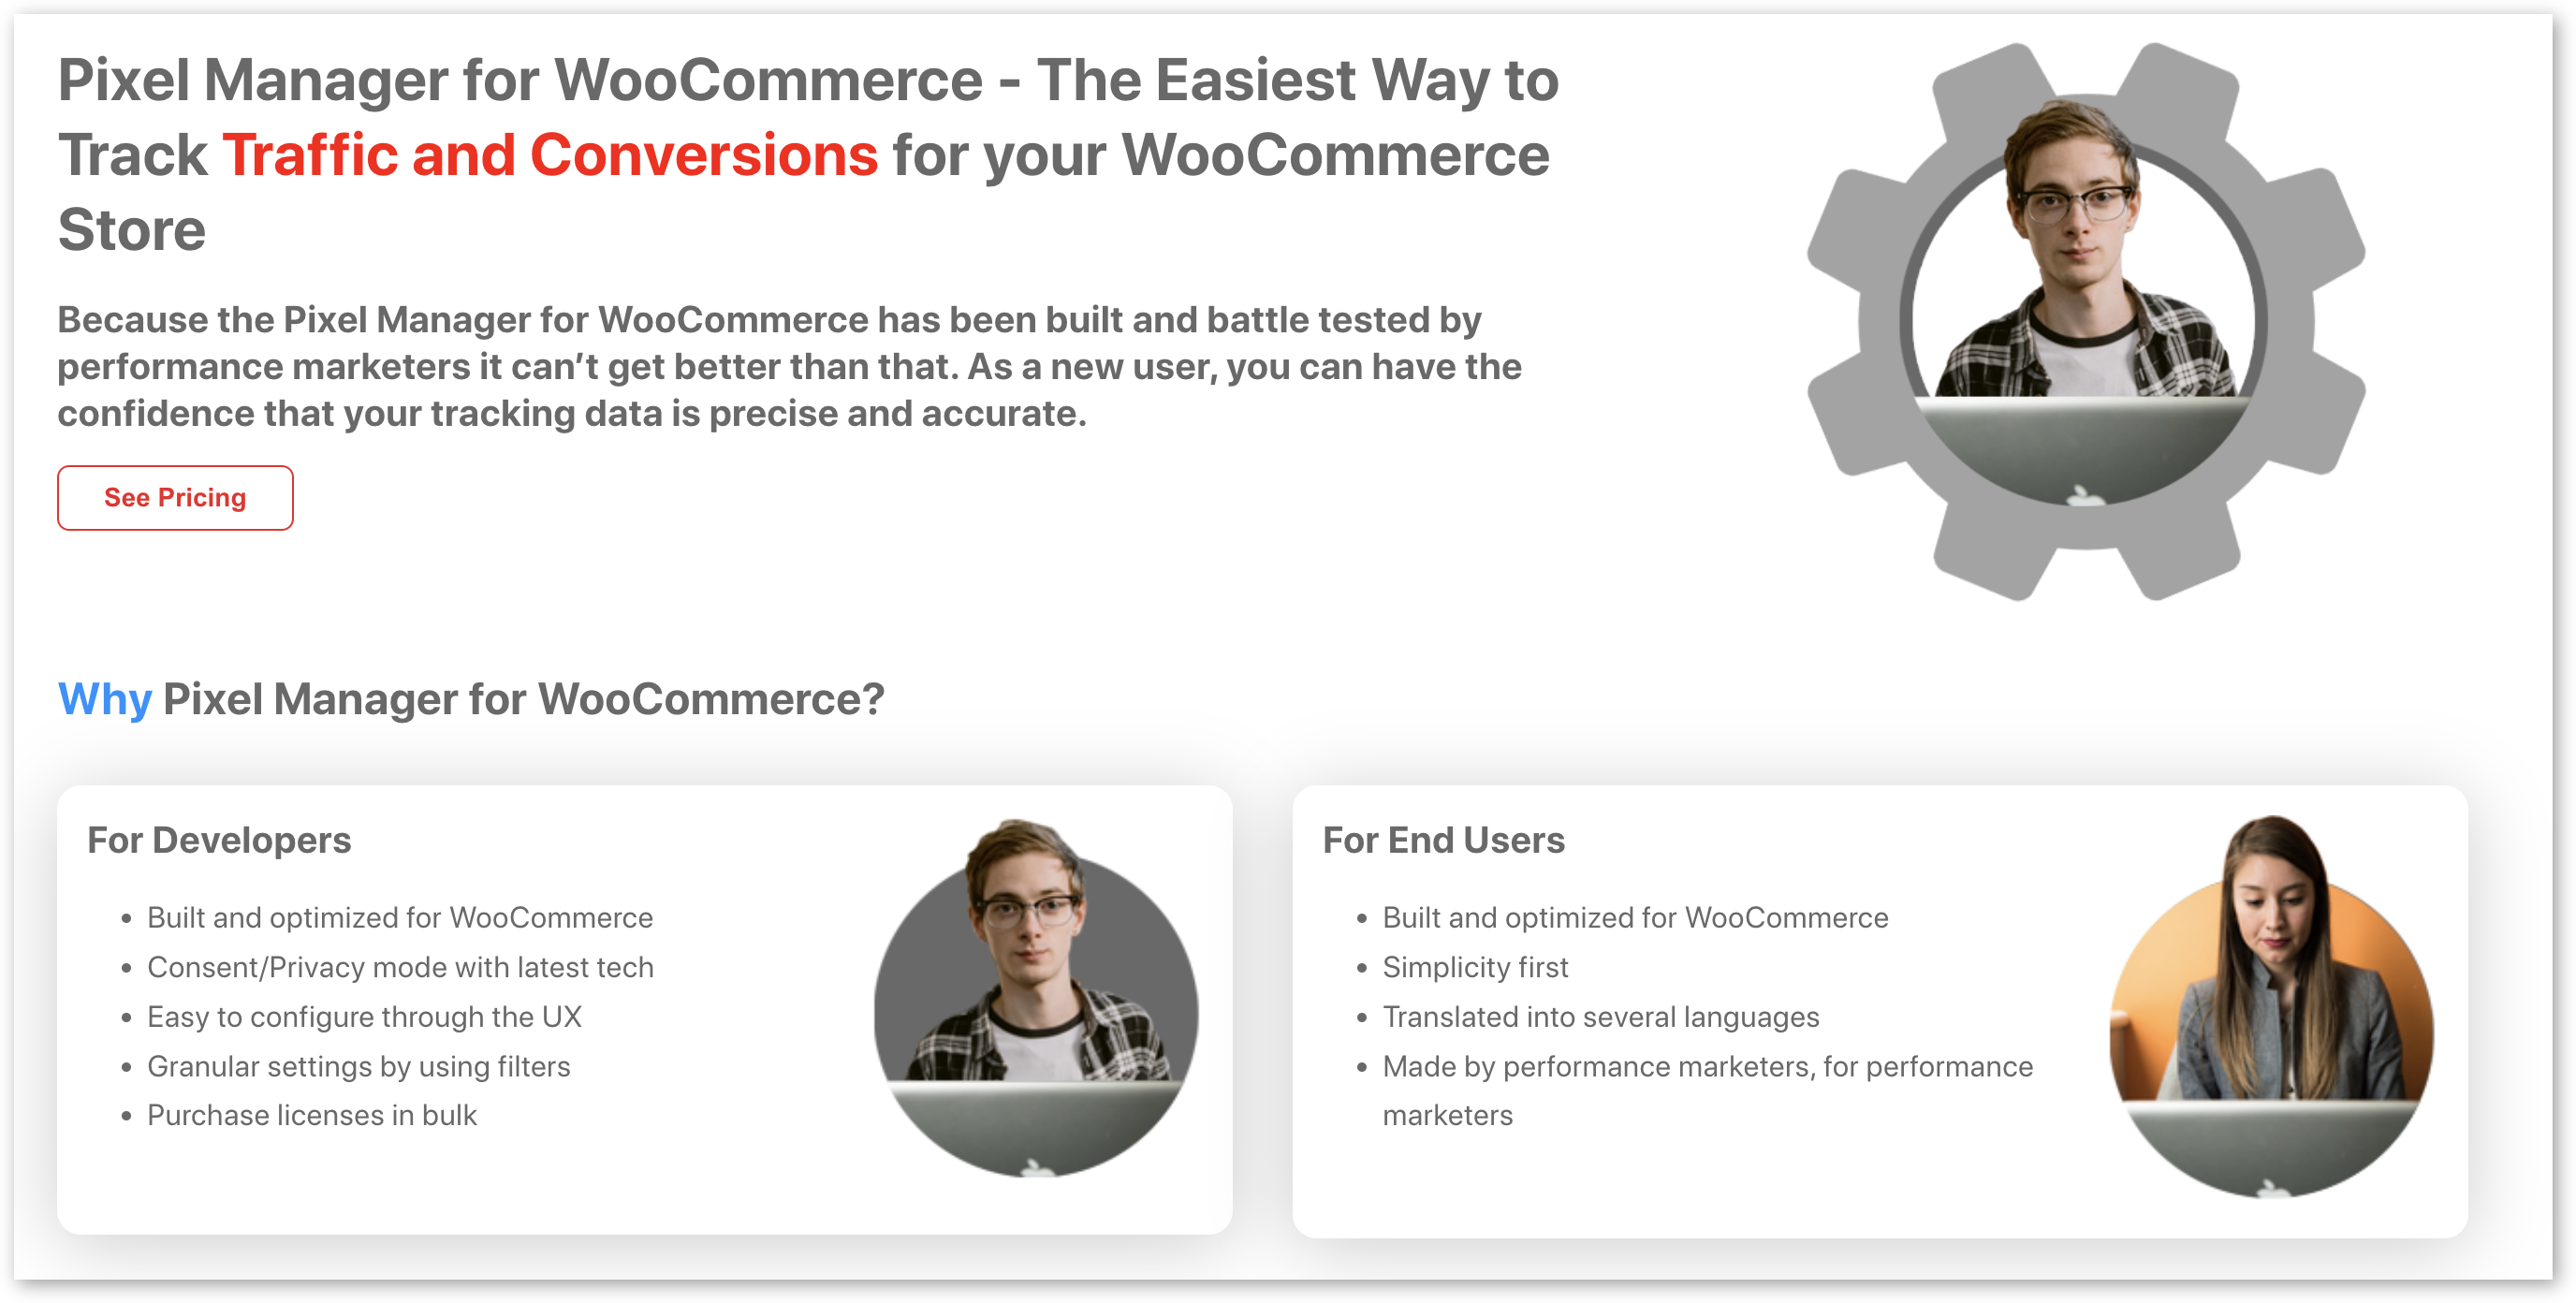 Pixel Manager for WooCommerce as featured on the SweetCode homepage